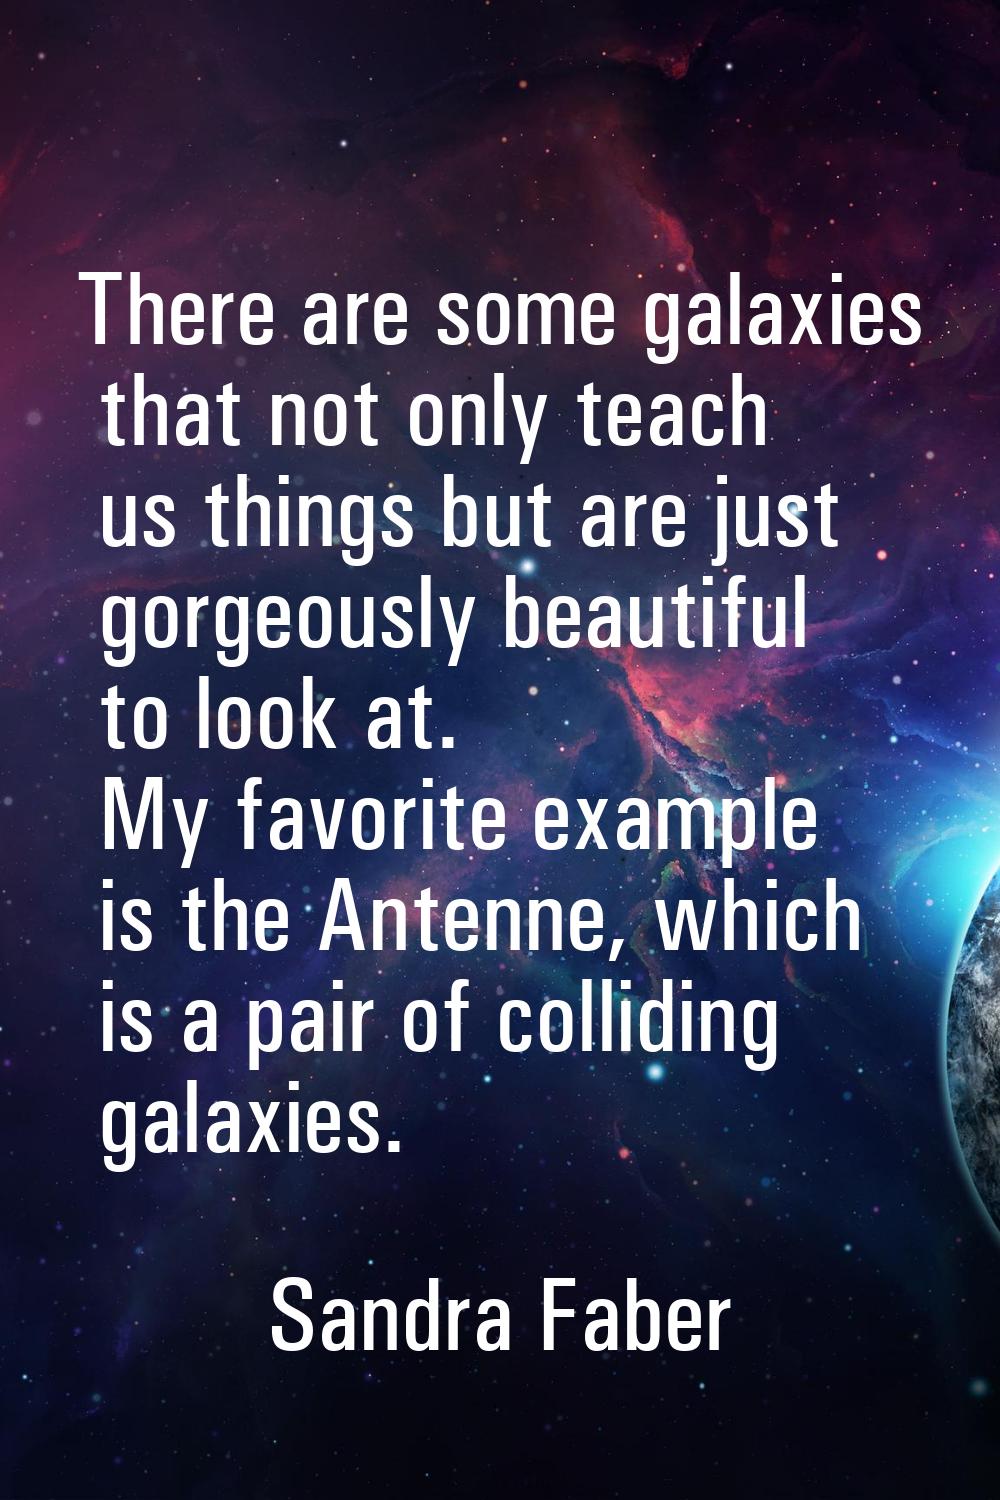 There are some galaxies that not only teach us things but are just gorgeously beautiful to look at.